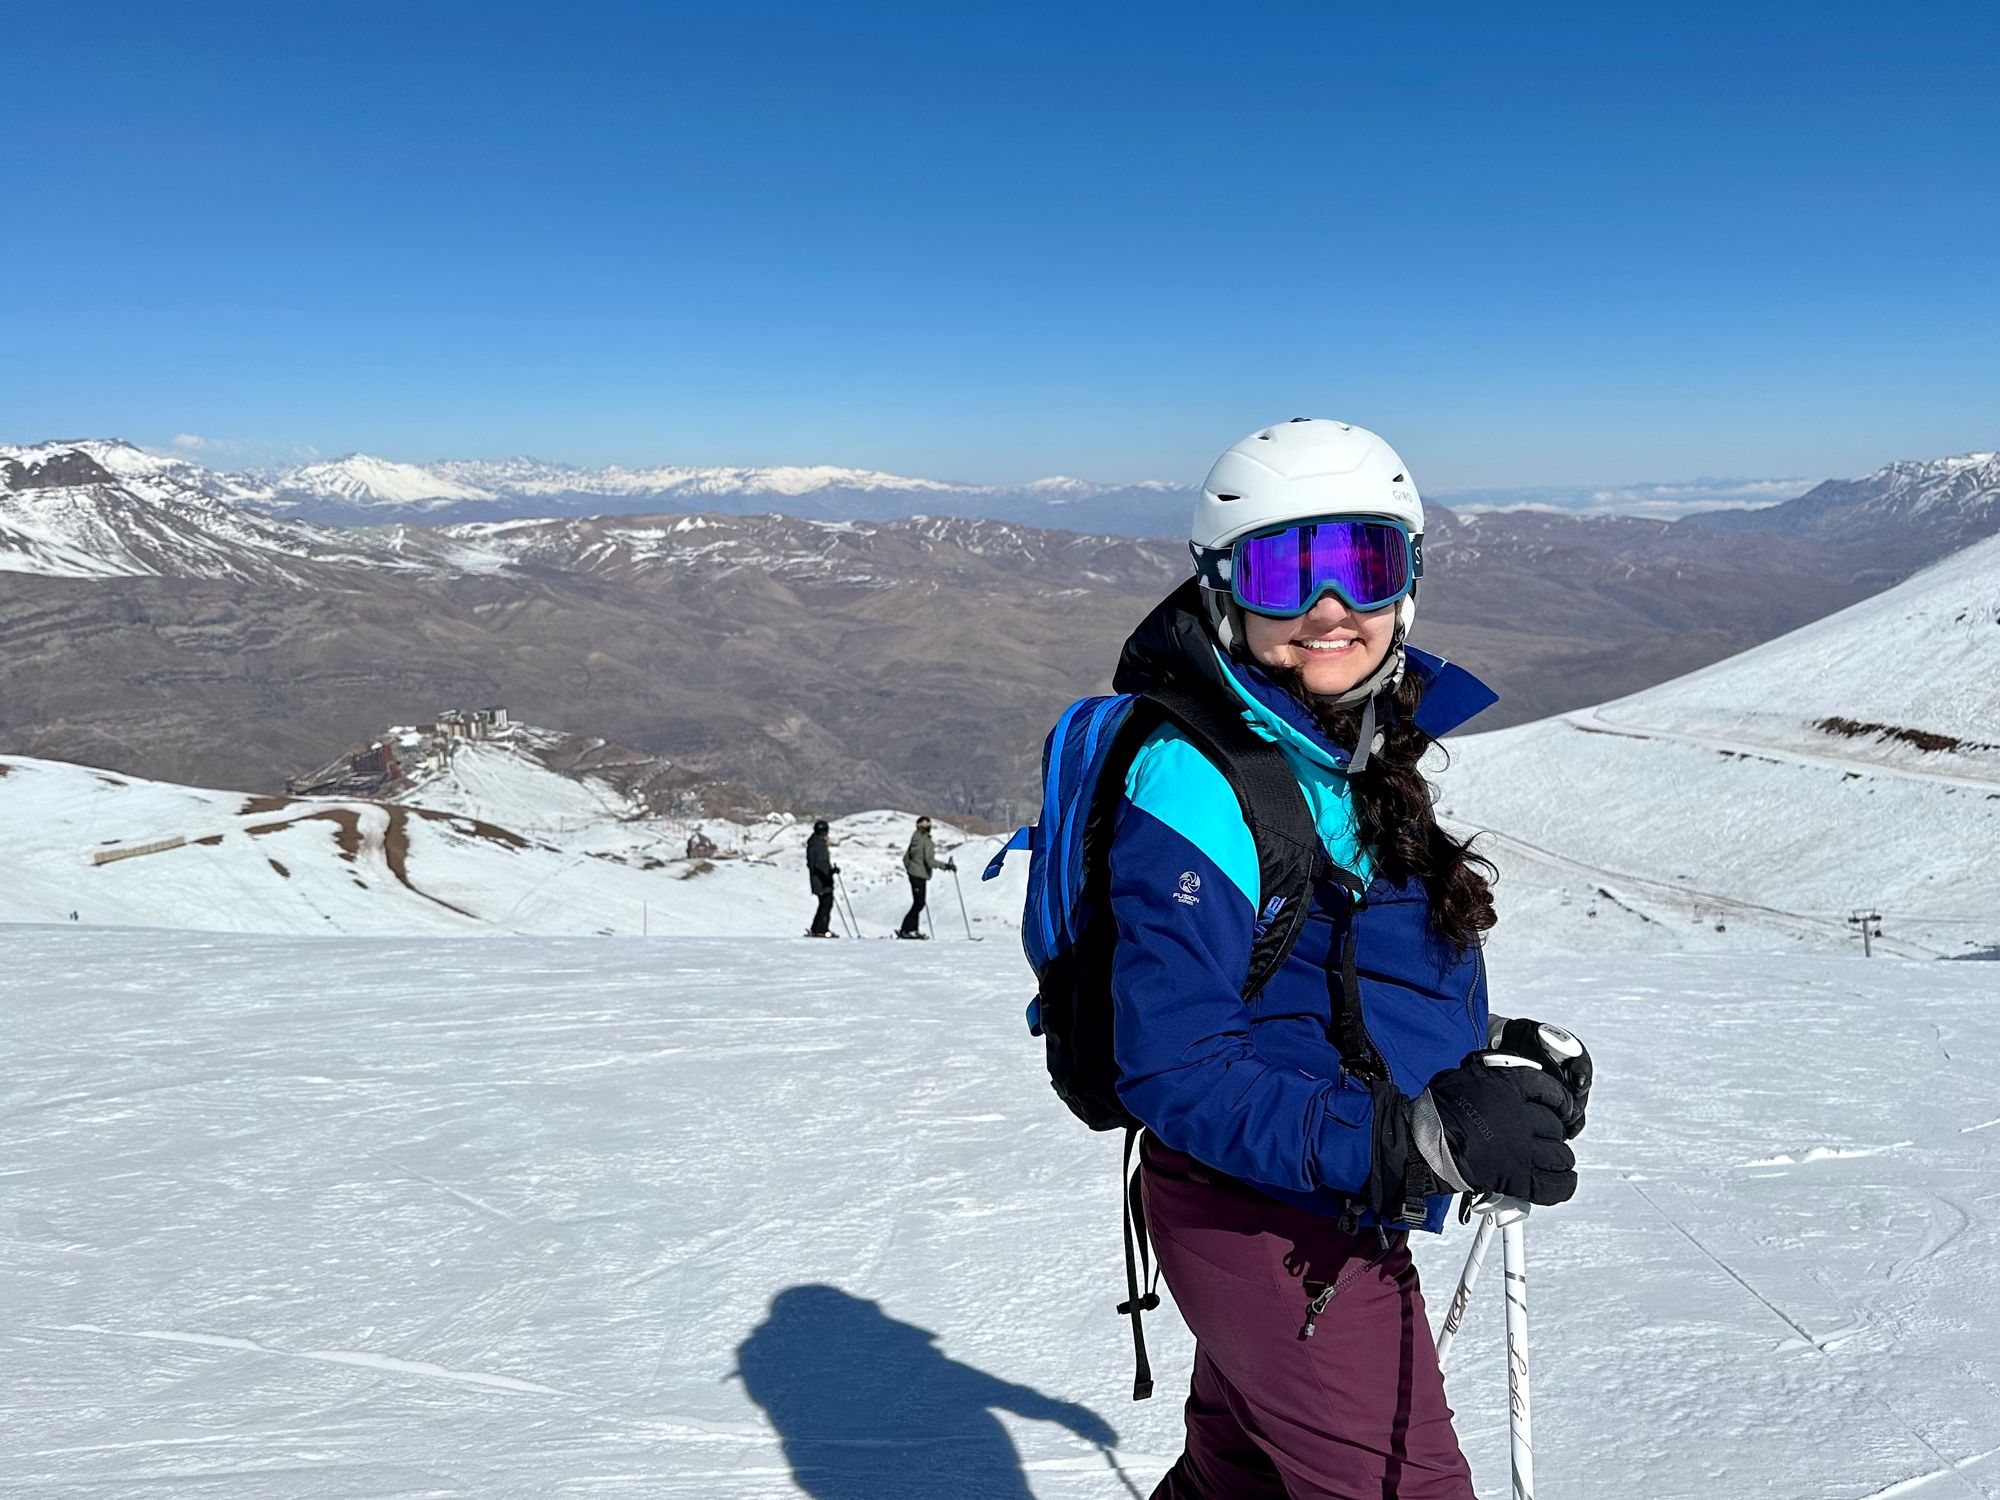 Meera in ski gear on the slopes of Valle Nevado